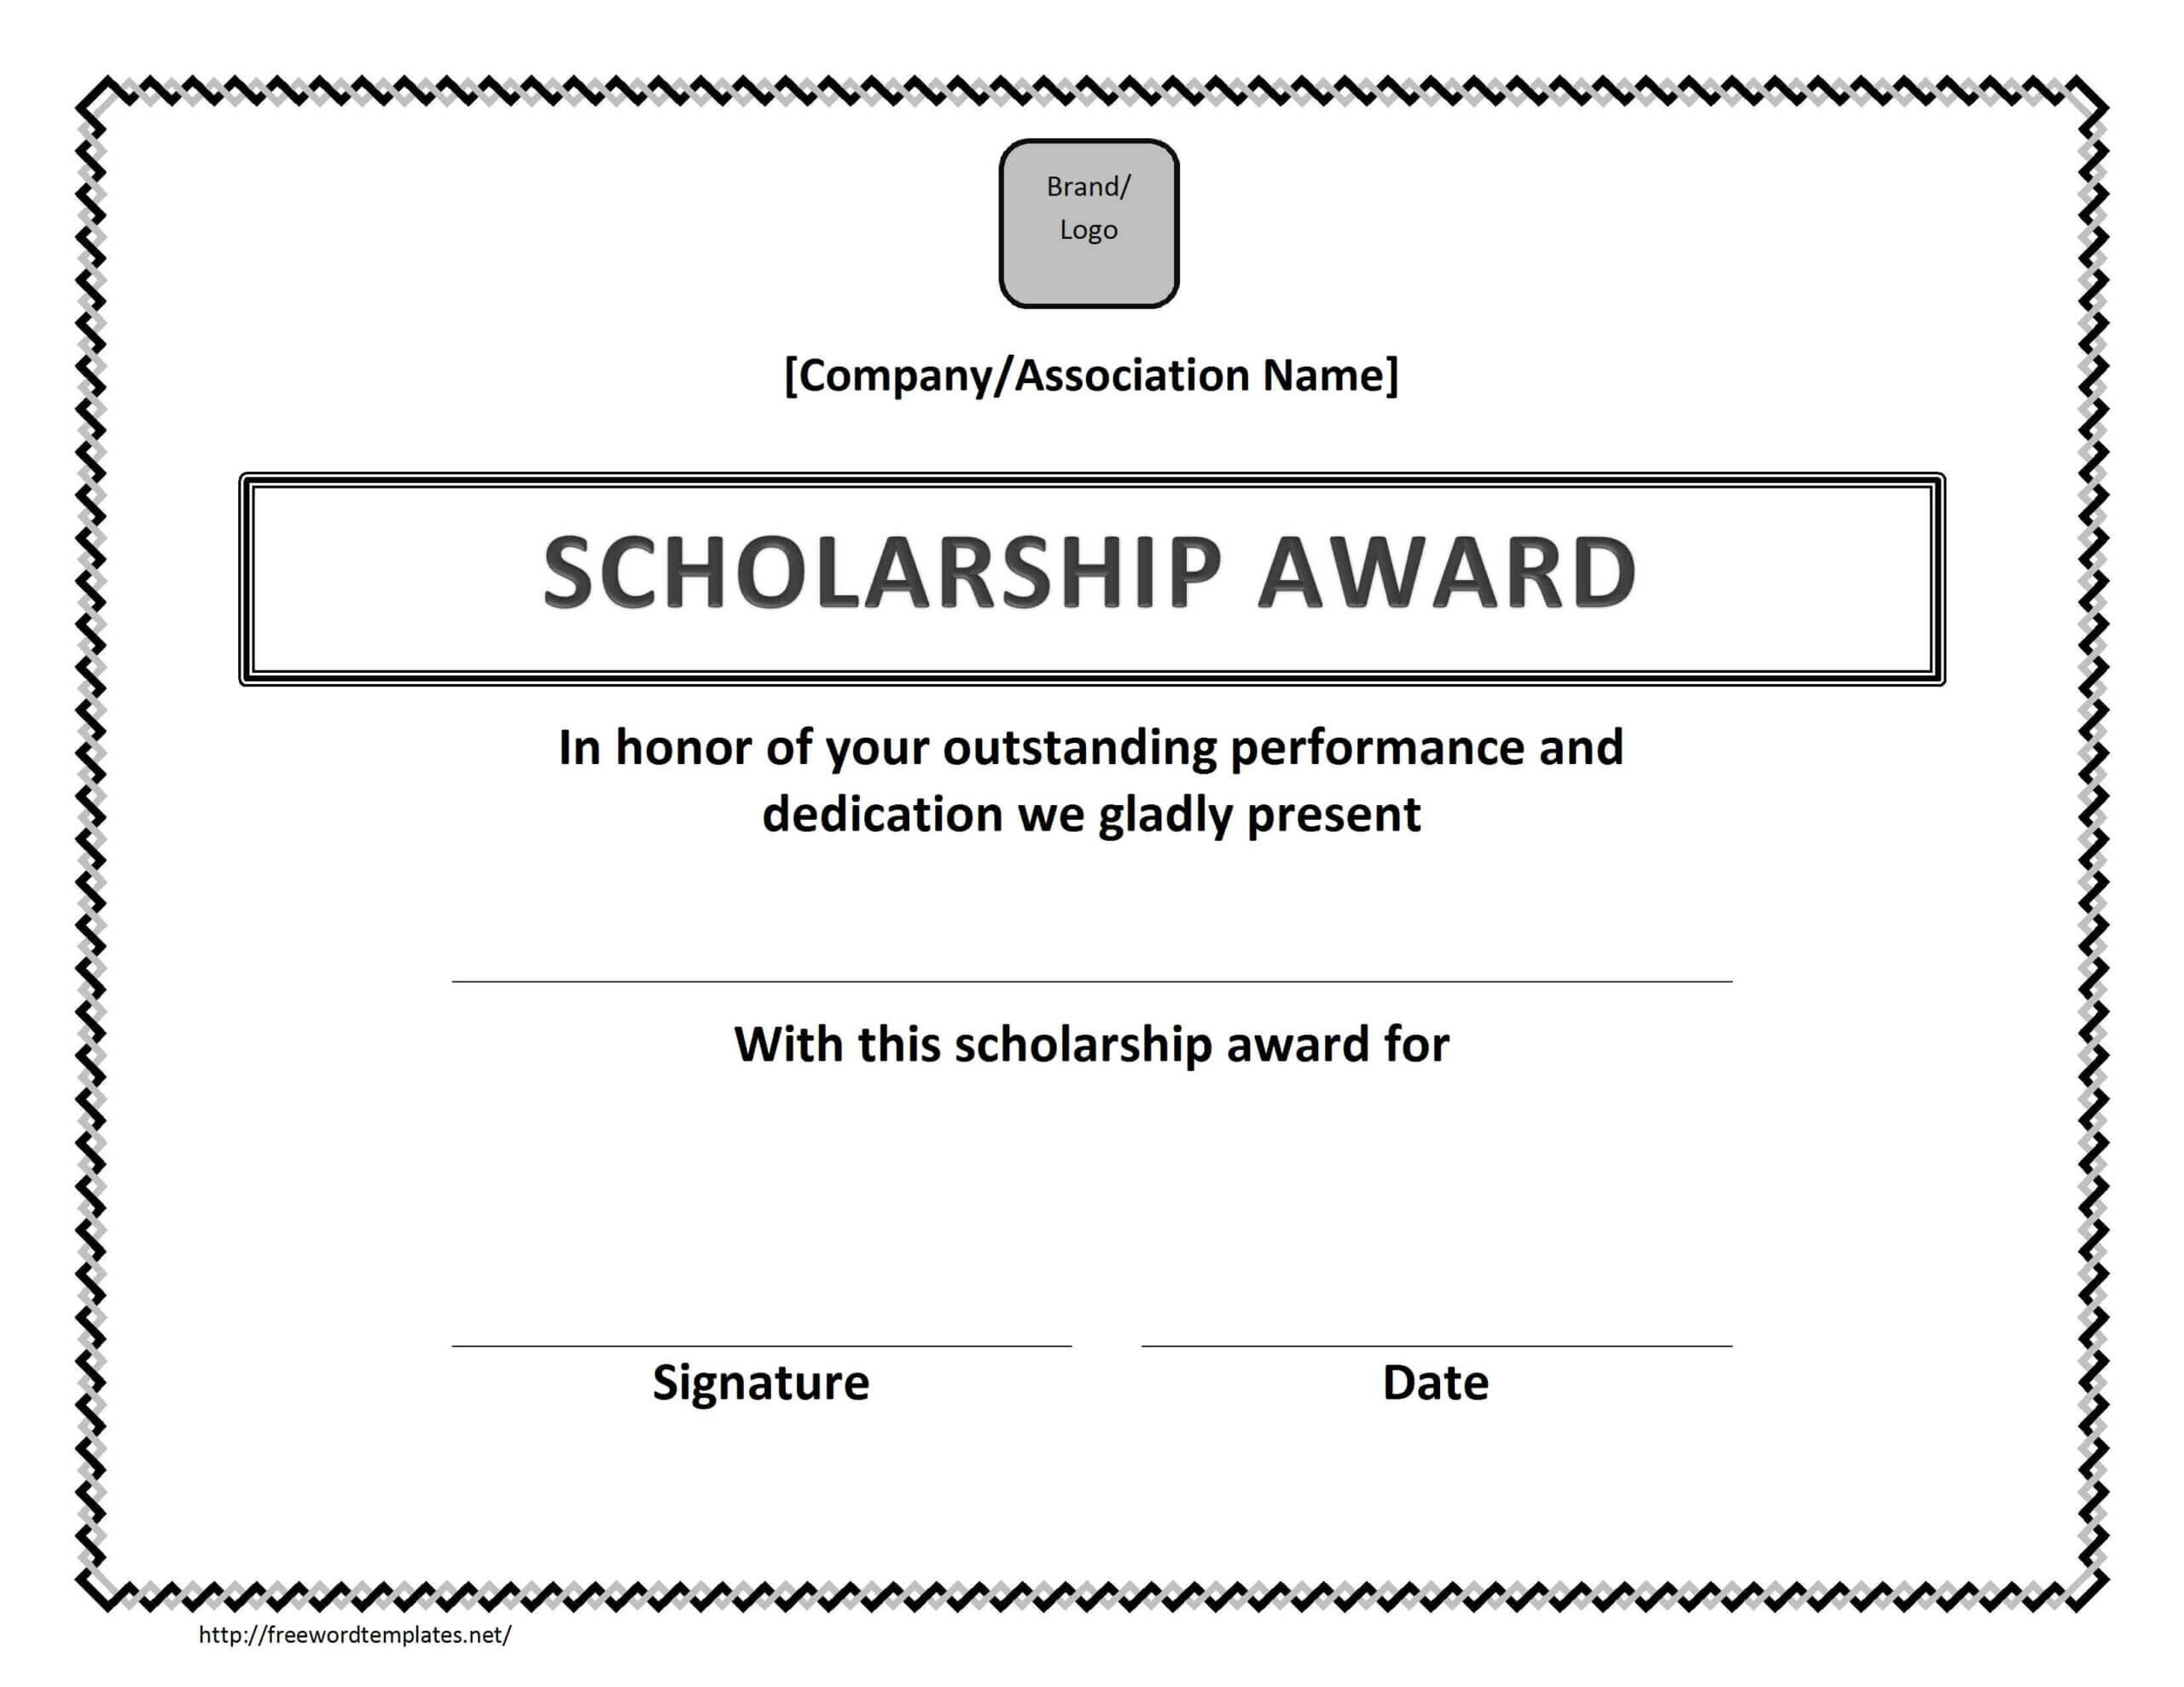 Scholarship Award Certificate Template With Microsoft Word Award Certificate Template